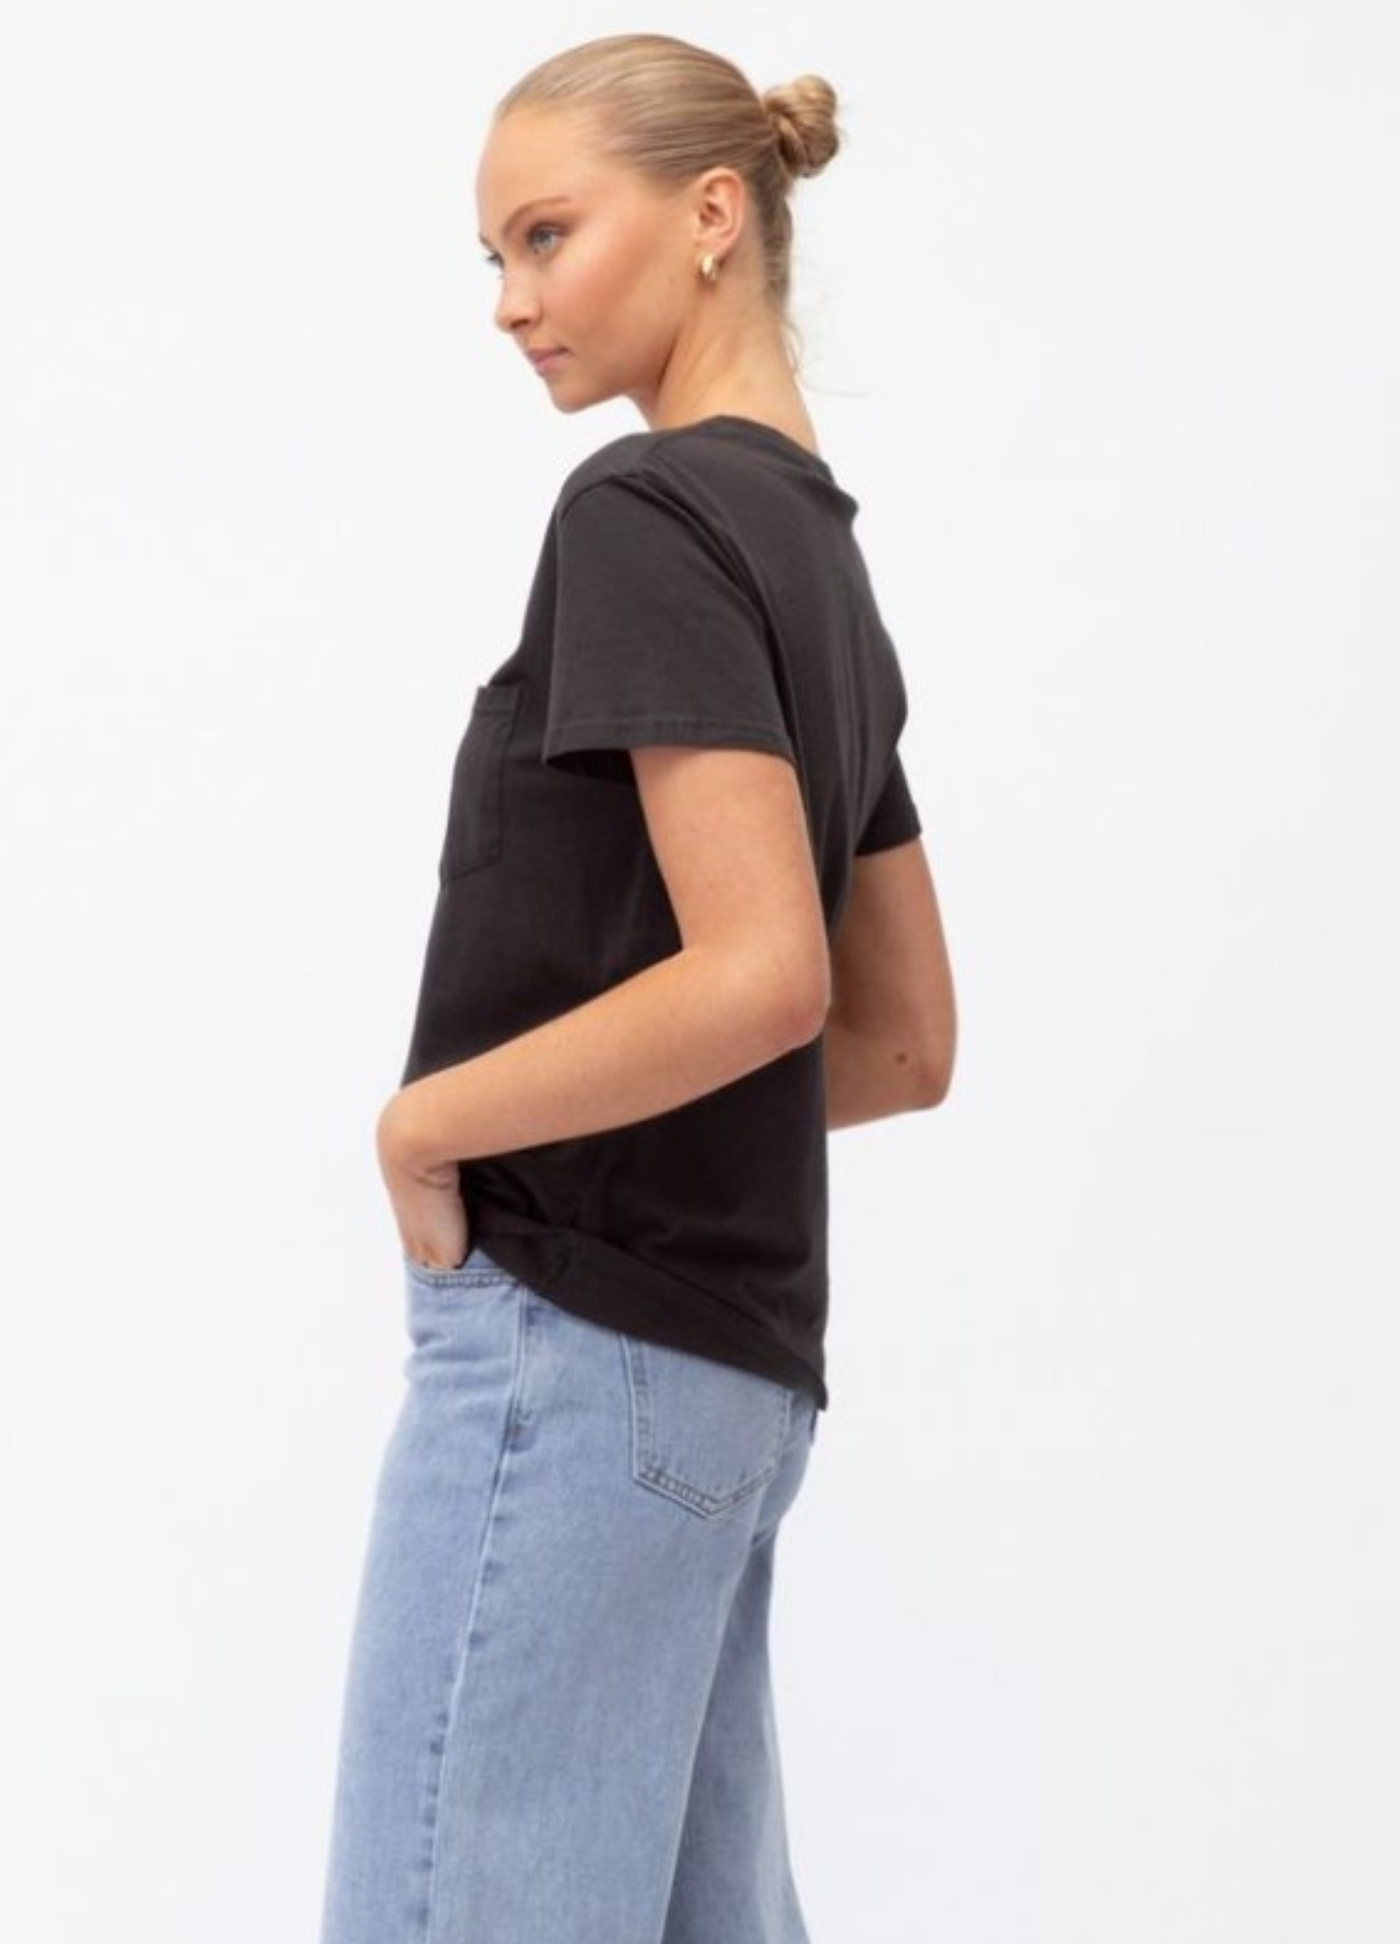 Paper Heart - Short Sleeve Casual Pocket Tee - Washed Black